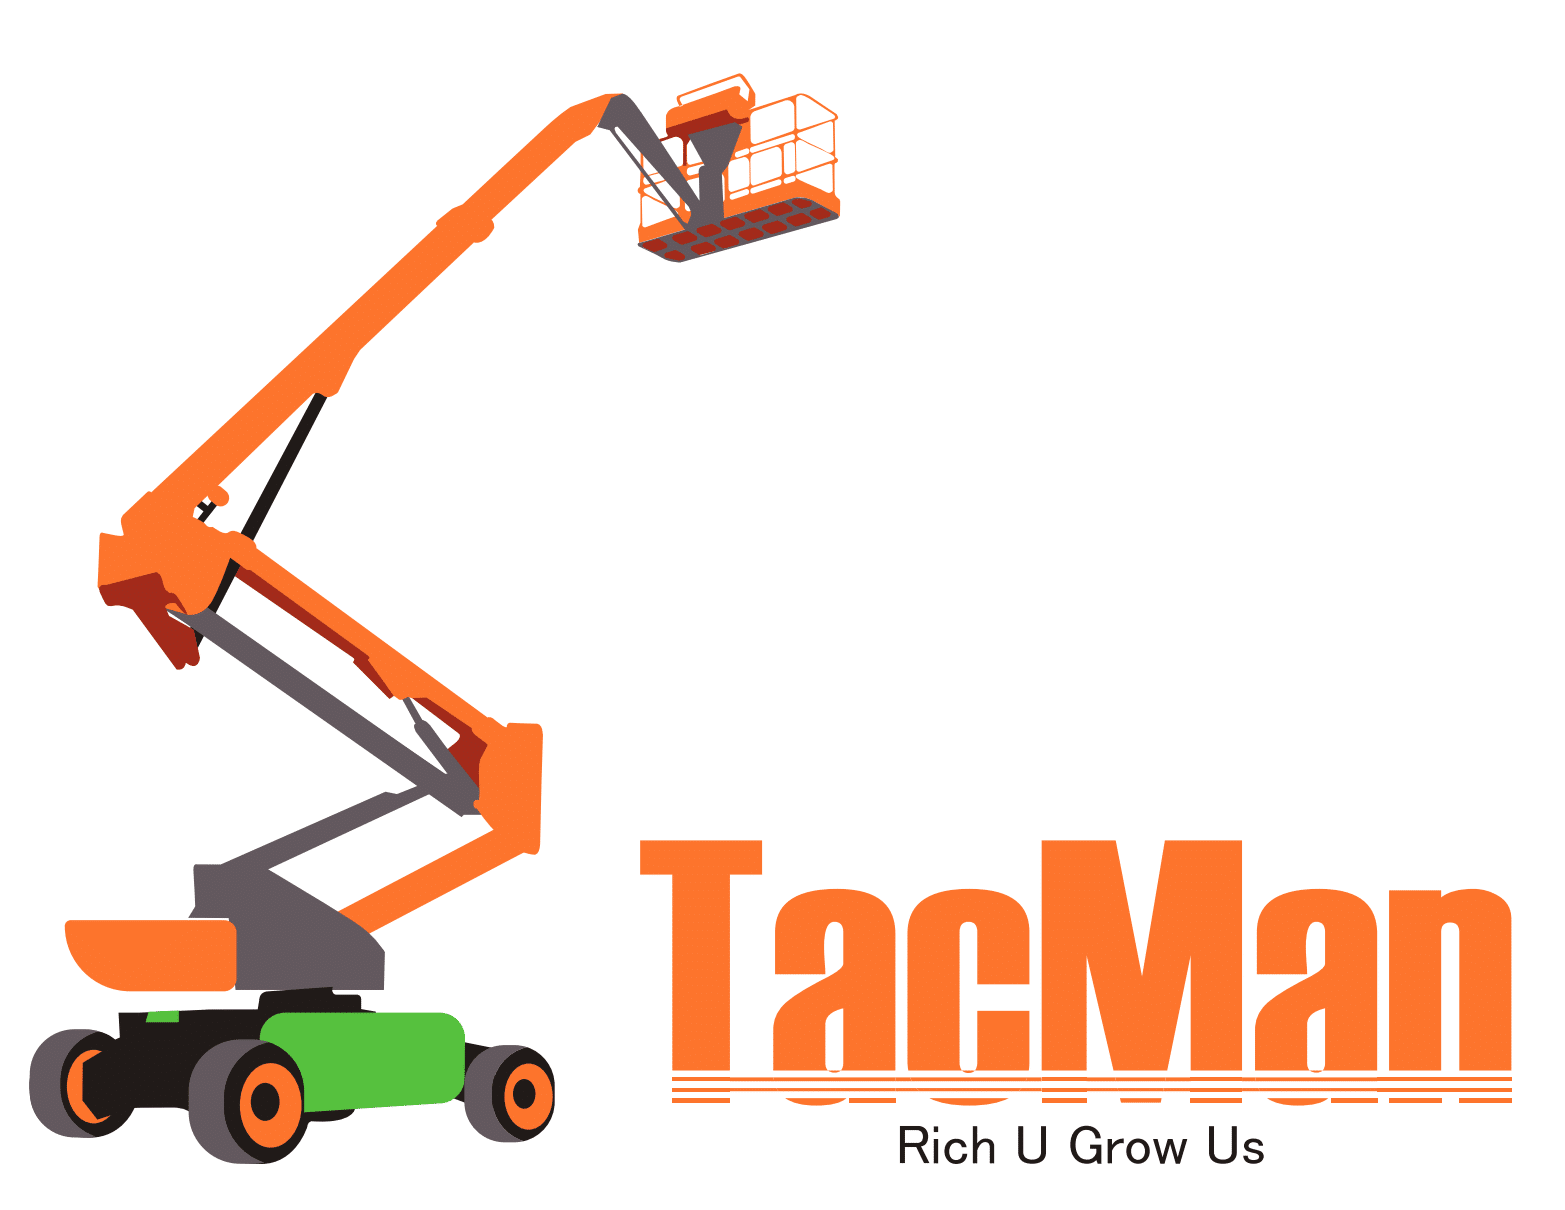 TACMANLIFTS